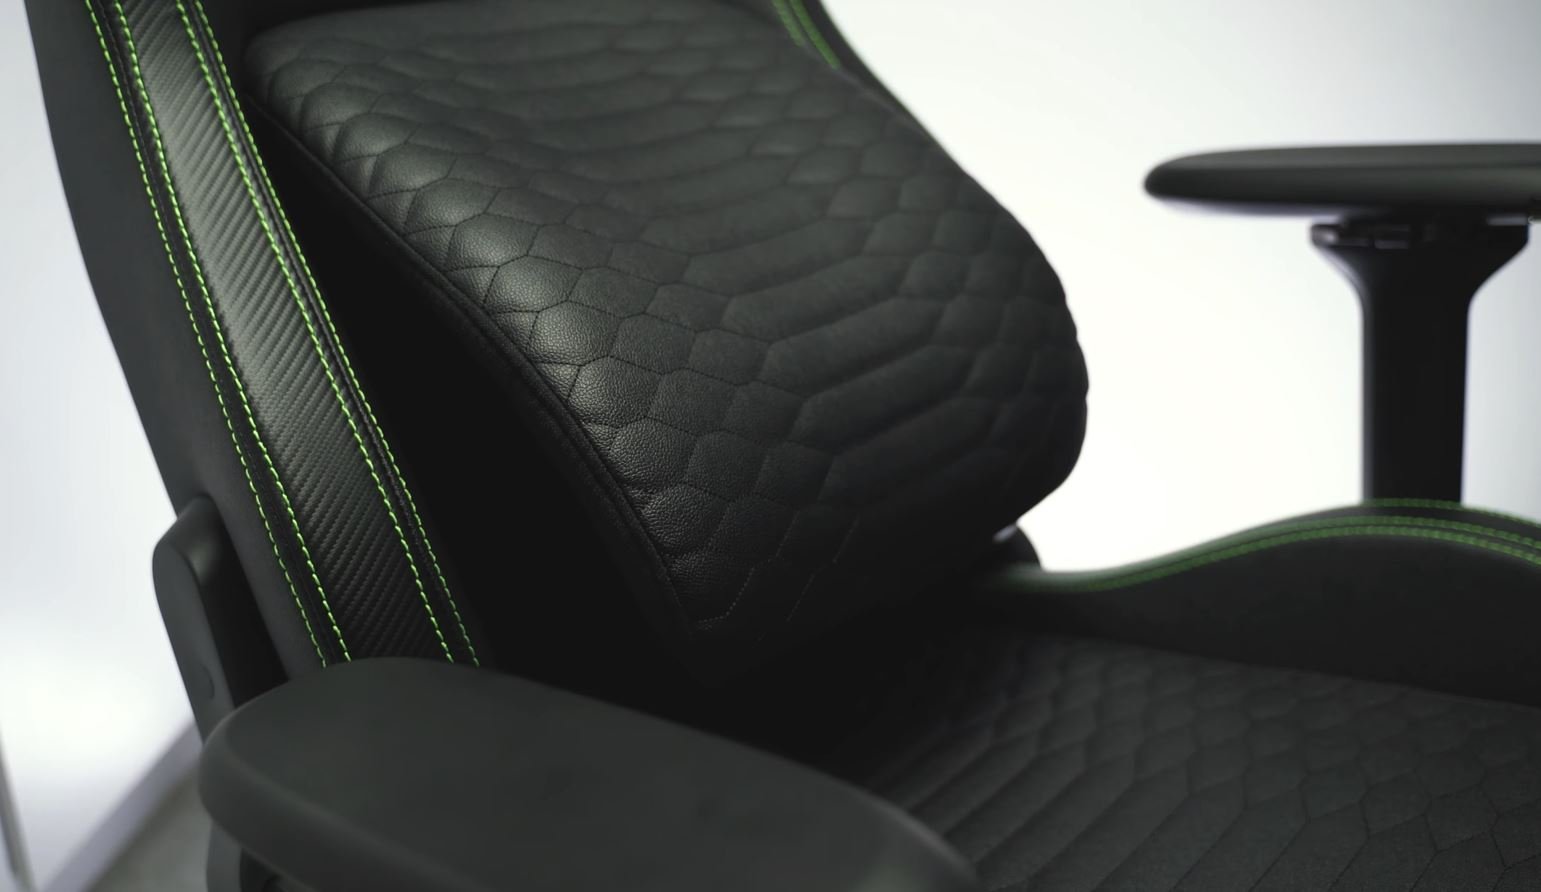 Razer Iskur Gaming Chair With Built in Lumbar Support Review 7